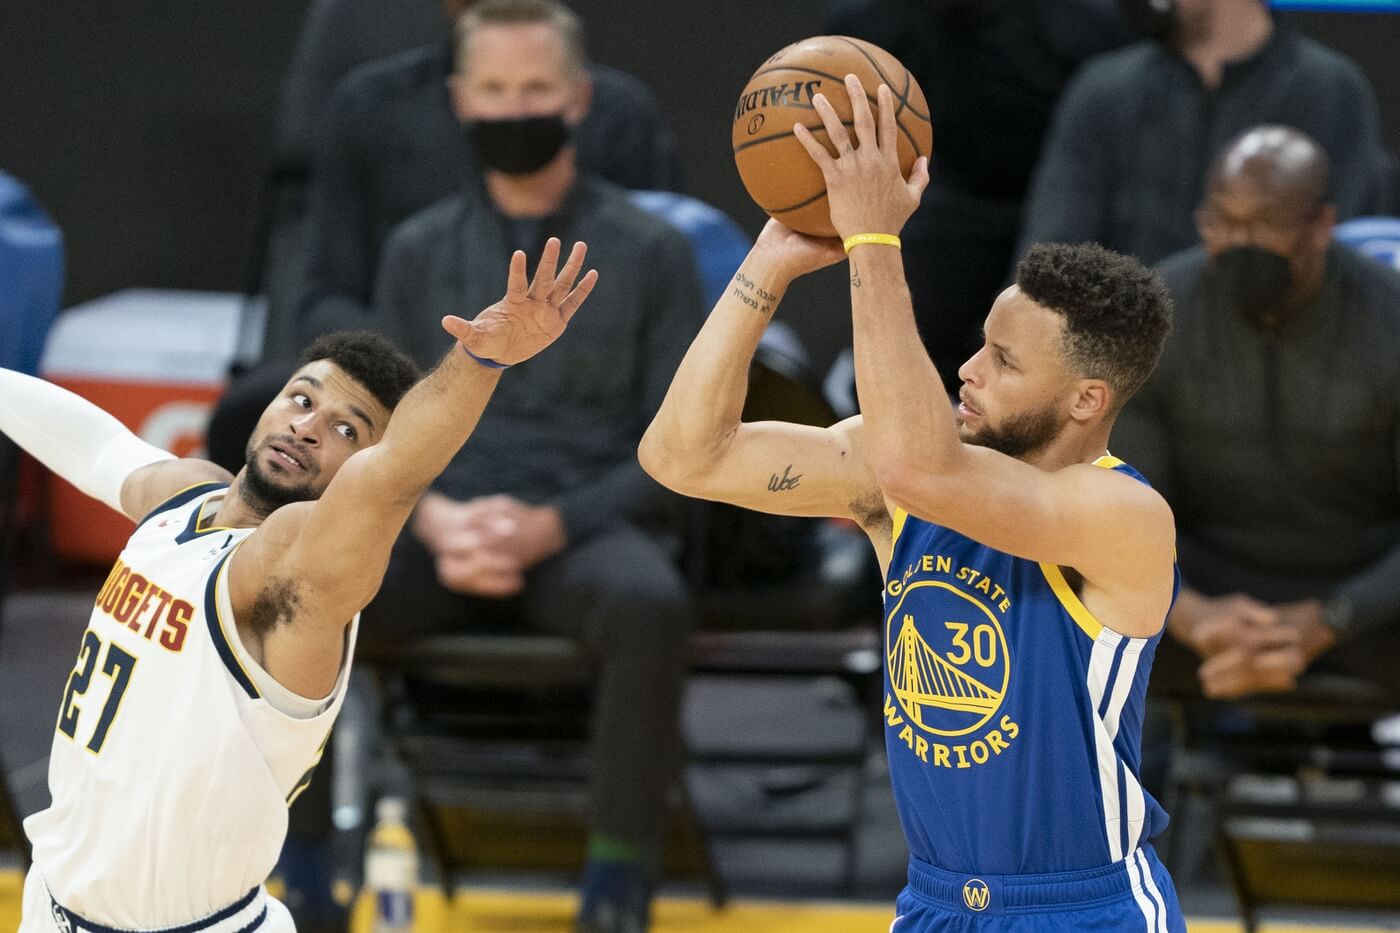 April 12, 2021; San Francisco, California, USA; Golden State Warriors guard Stephen Curry (30) shoots the basketball against Denver Nuggets guard Jamal Murray (27) during the first quarter at Chase Center. Mandatory Credit: Kyle Terada-USA TODAY Sports